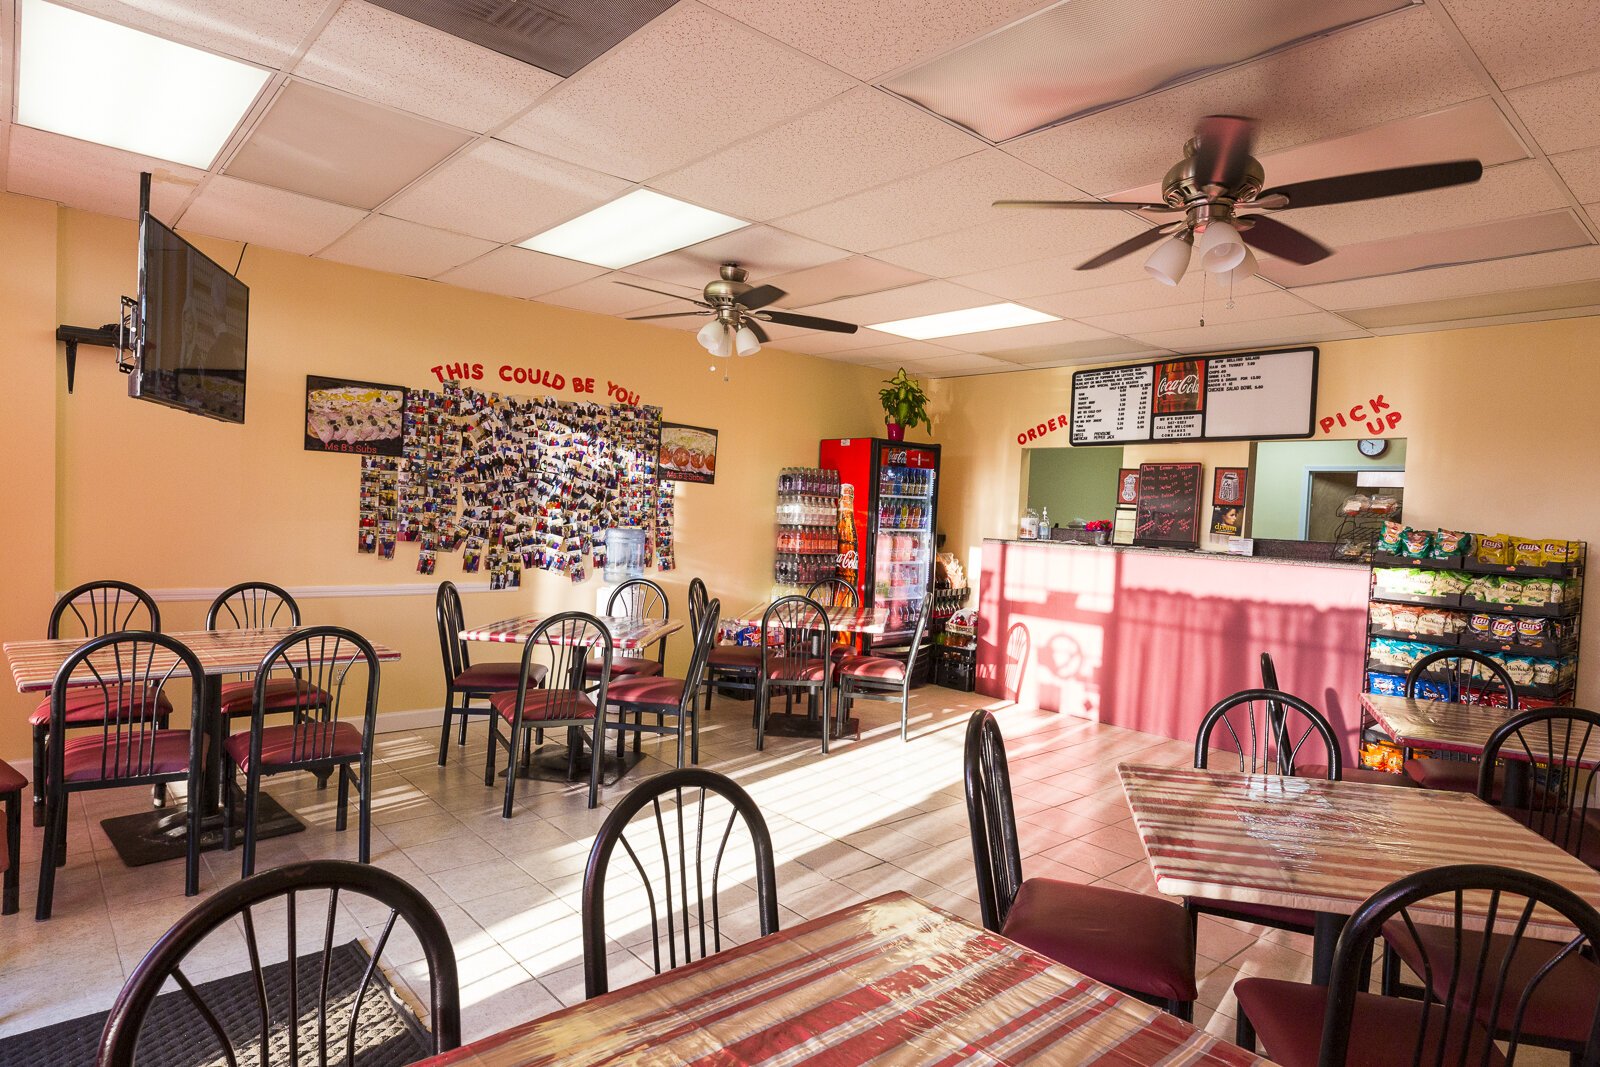 Ms. B's Sub Shop opened in January 2019 and already has a devoted fan base, thanks in large part to co-owner Bonnie Harris's fame as the secret behind the sandwiches at the Super Submarine Sandwich Shop, better known as Chinese Sub Shop. (Ziggy Mack)